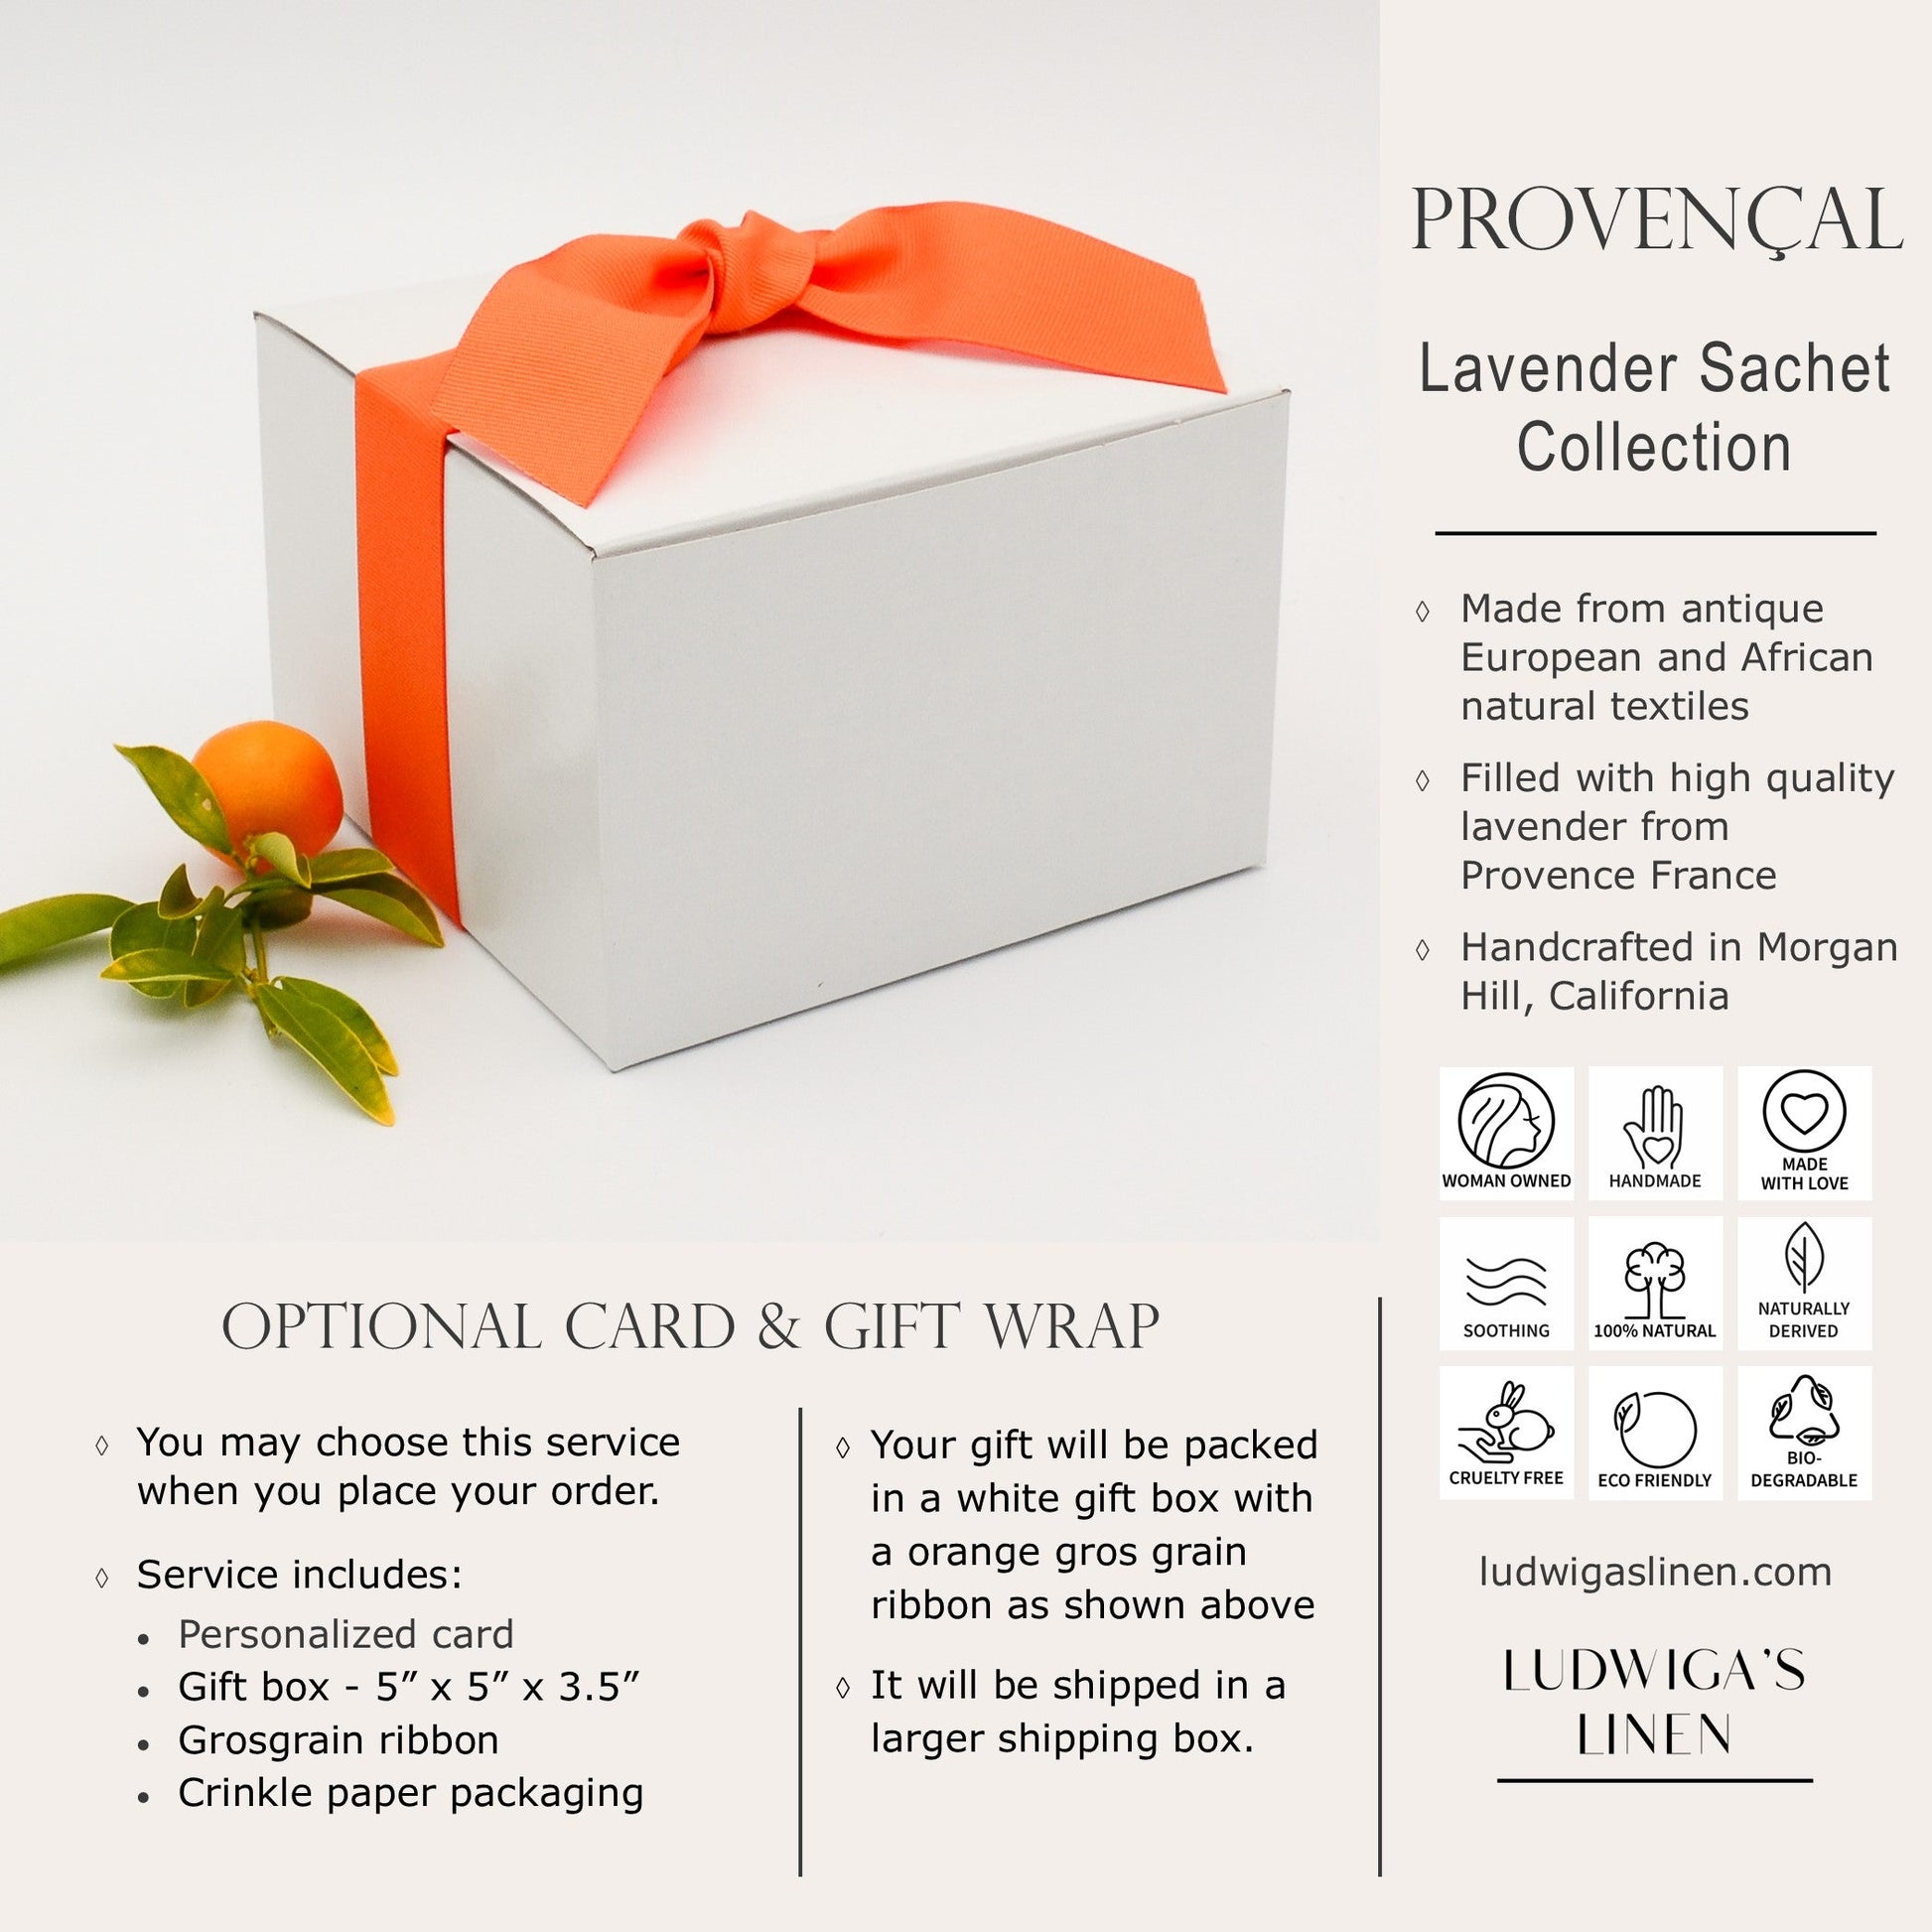 Optional gift box with orange gros grain ribbon, information about Ludwiga's Linen Provençal sachet collection and shipping information